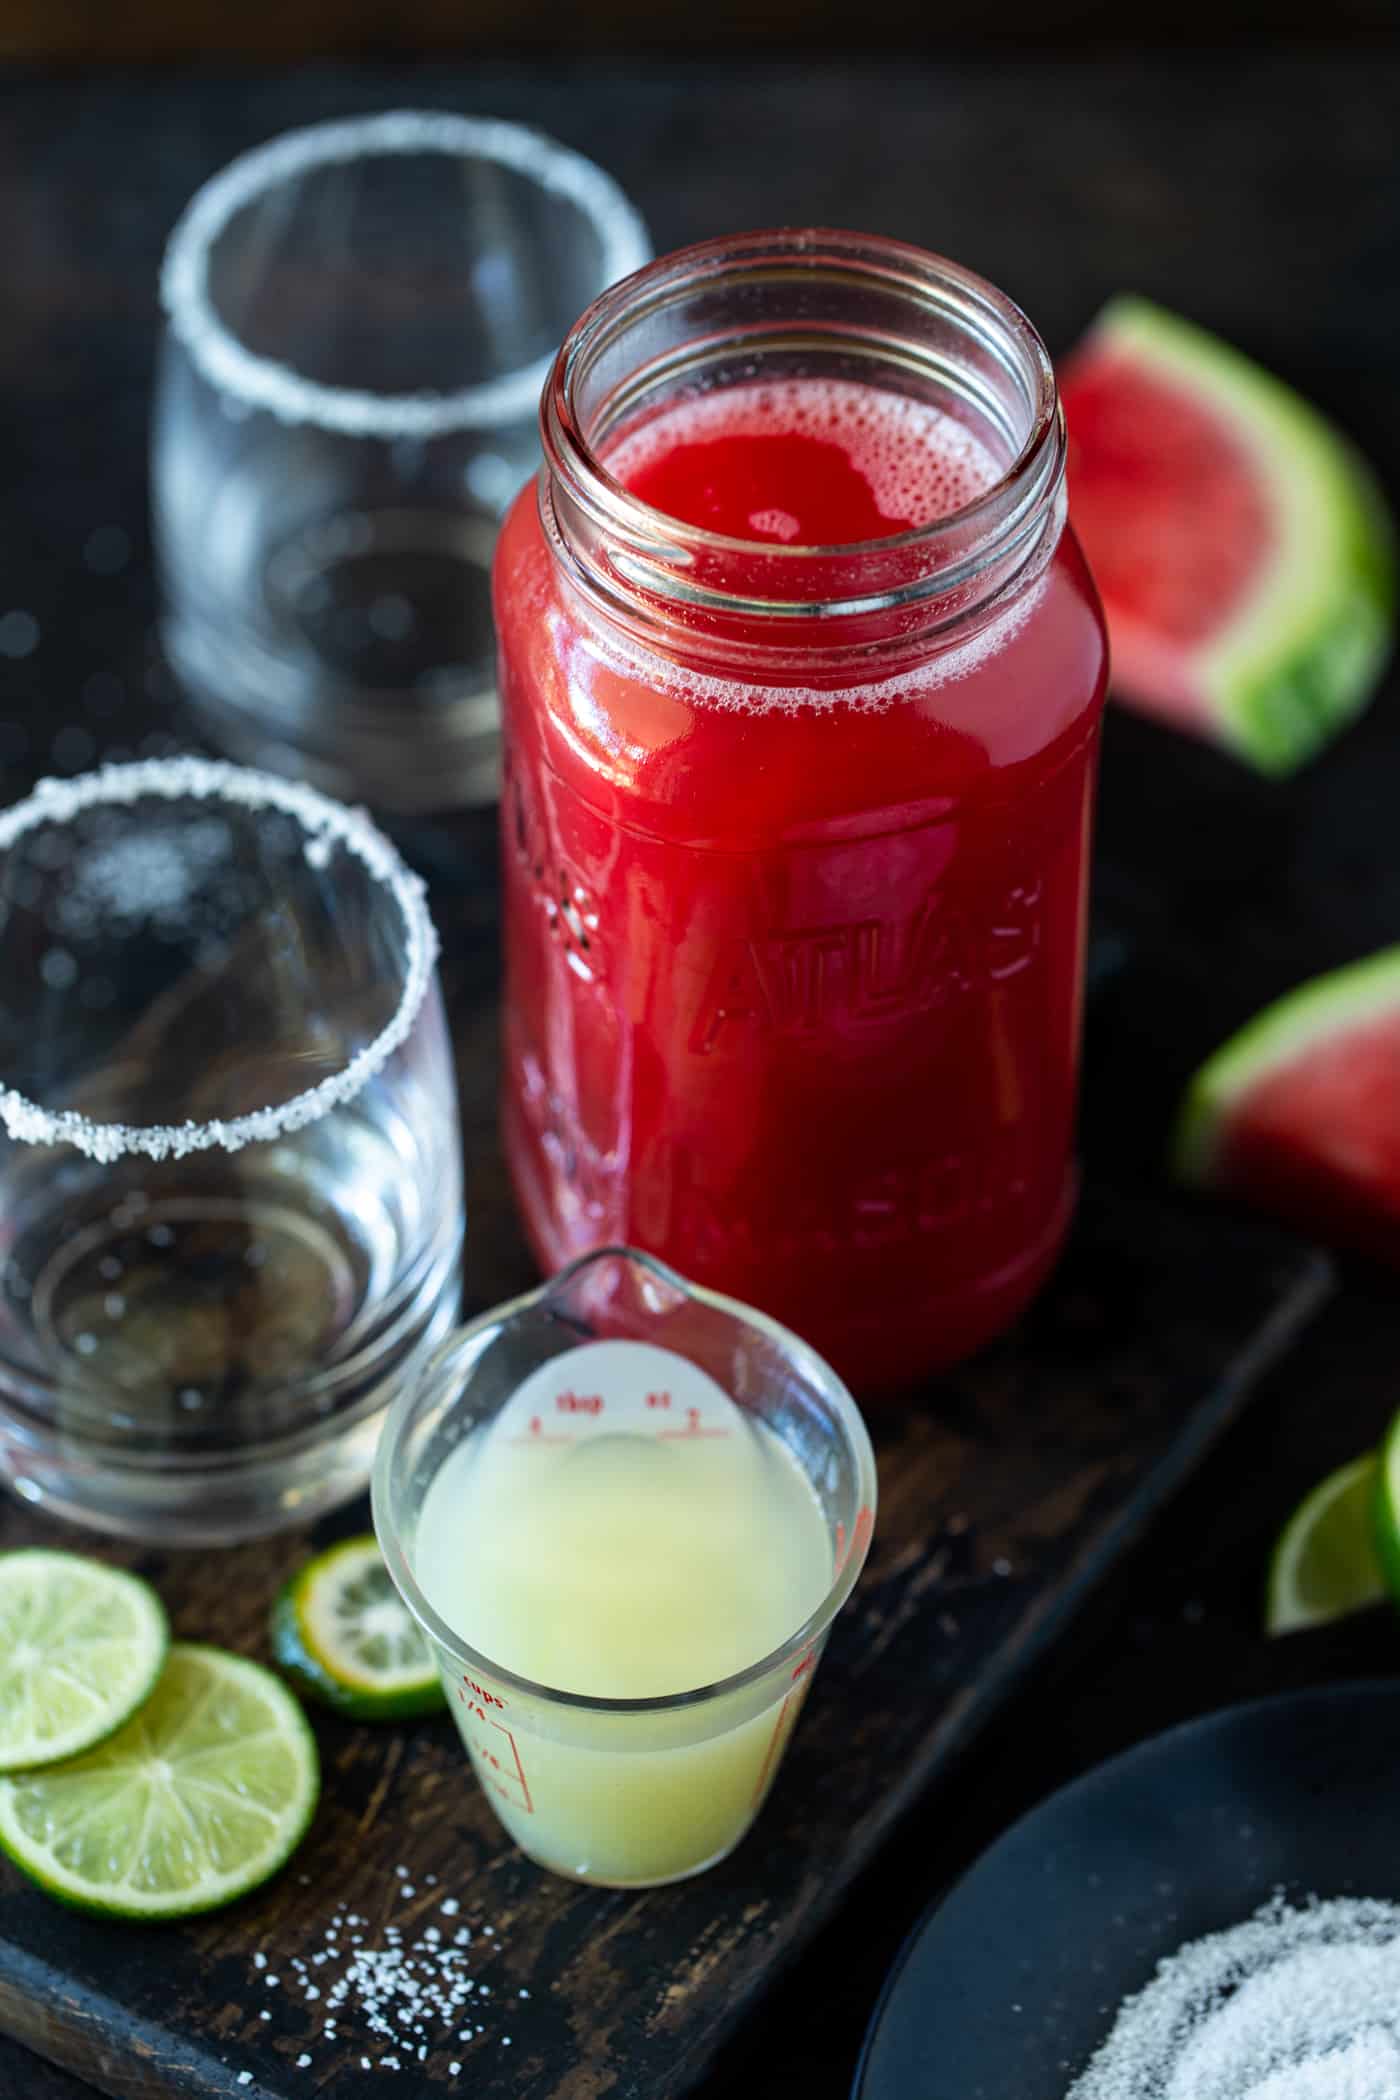 A close up of a glass jar on a table, with Margarita and Watermelon.